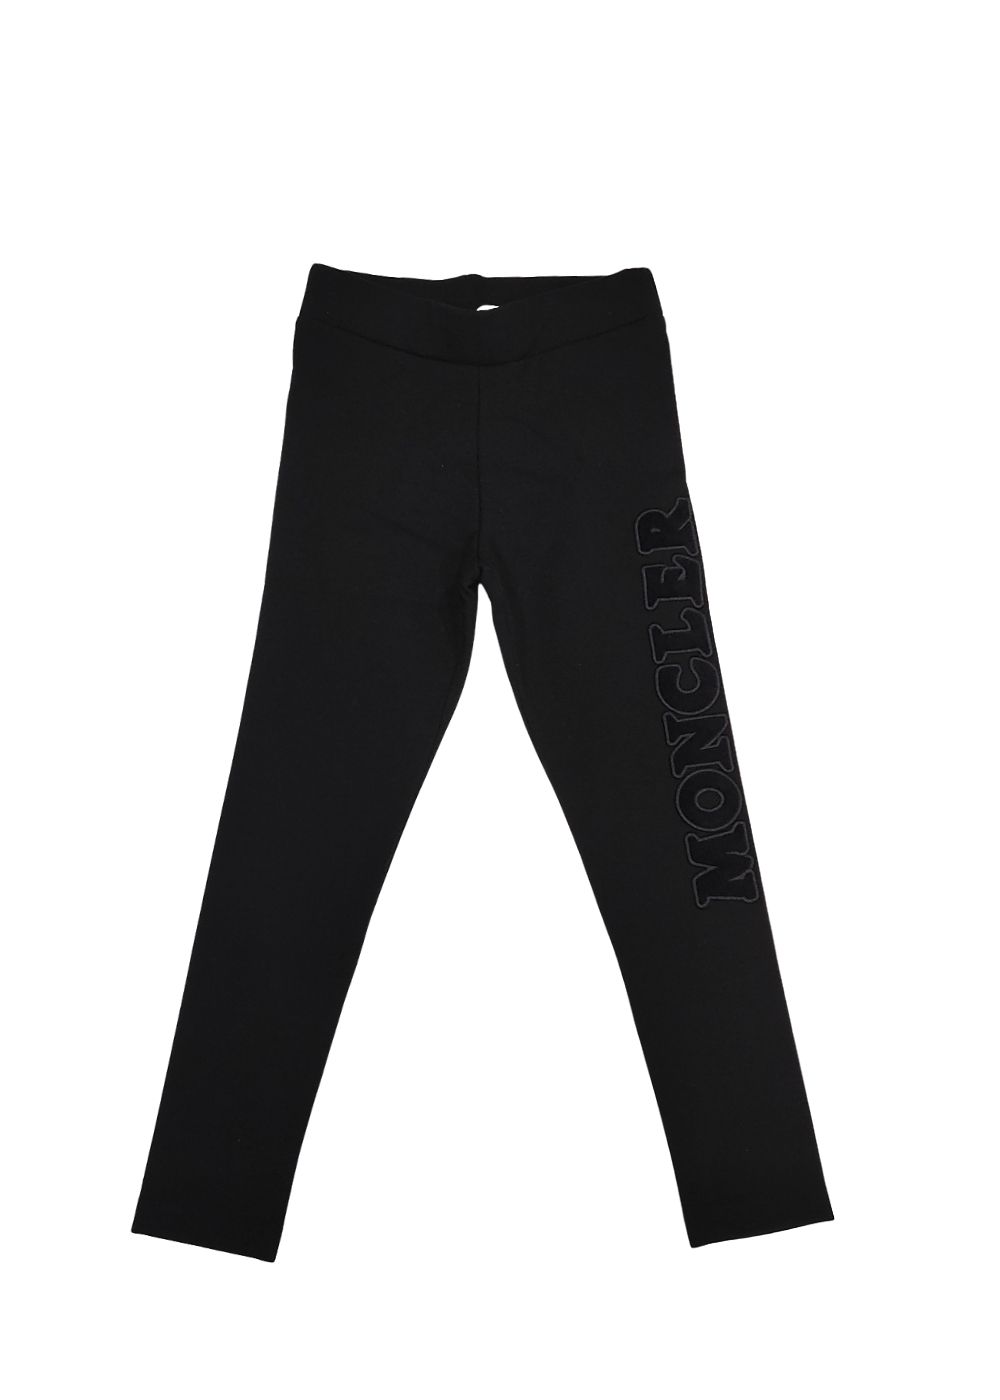 Featured image for “Moncler Leggins Nero”